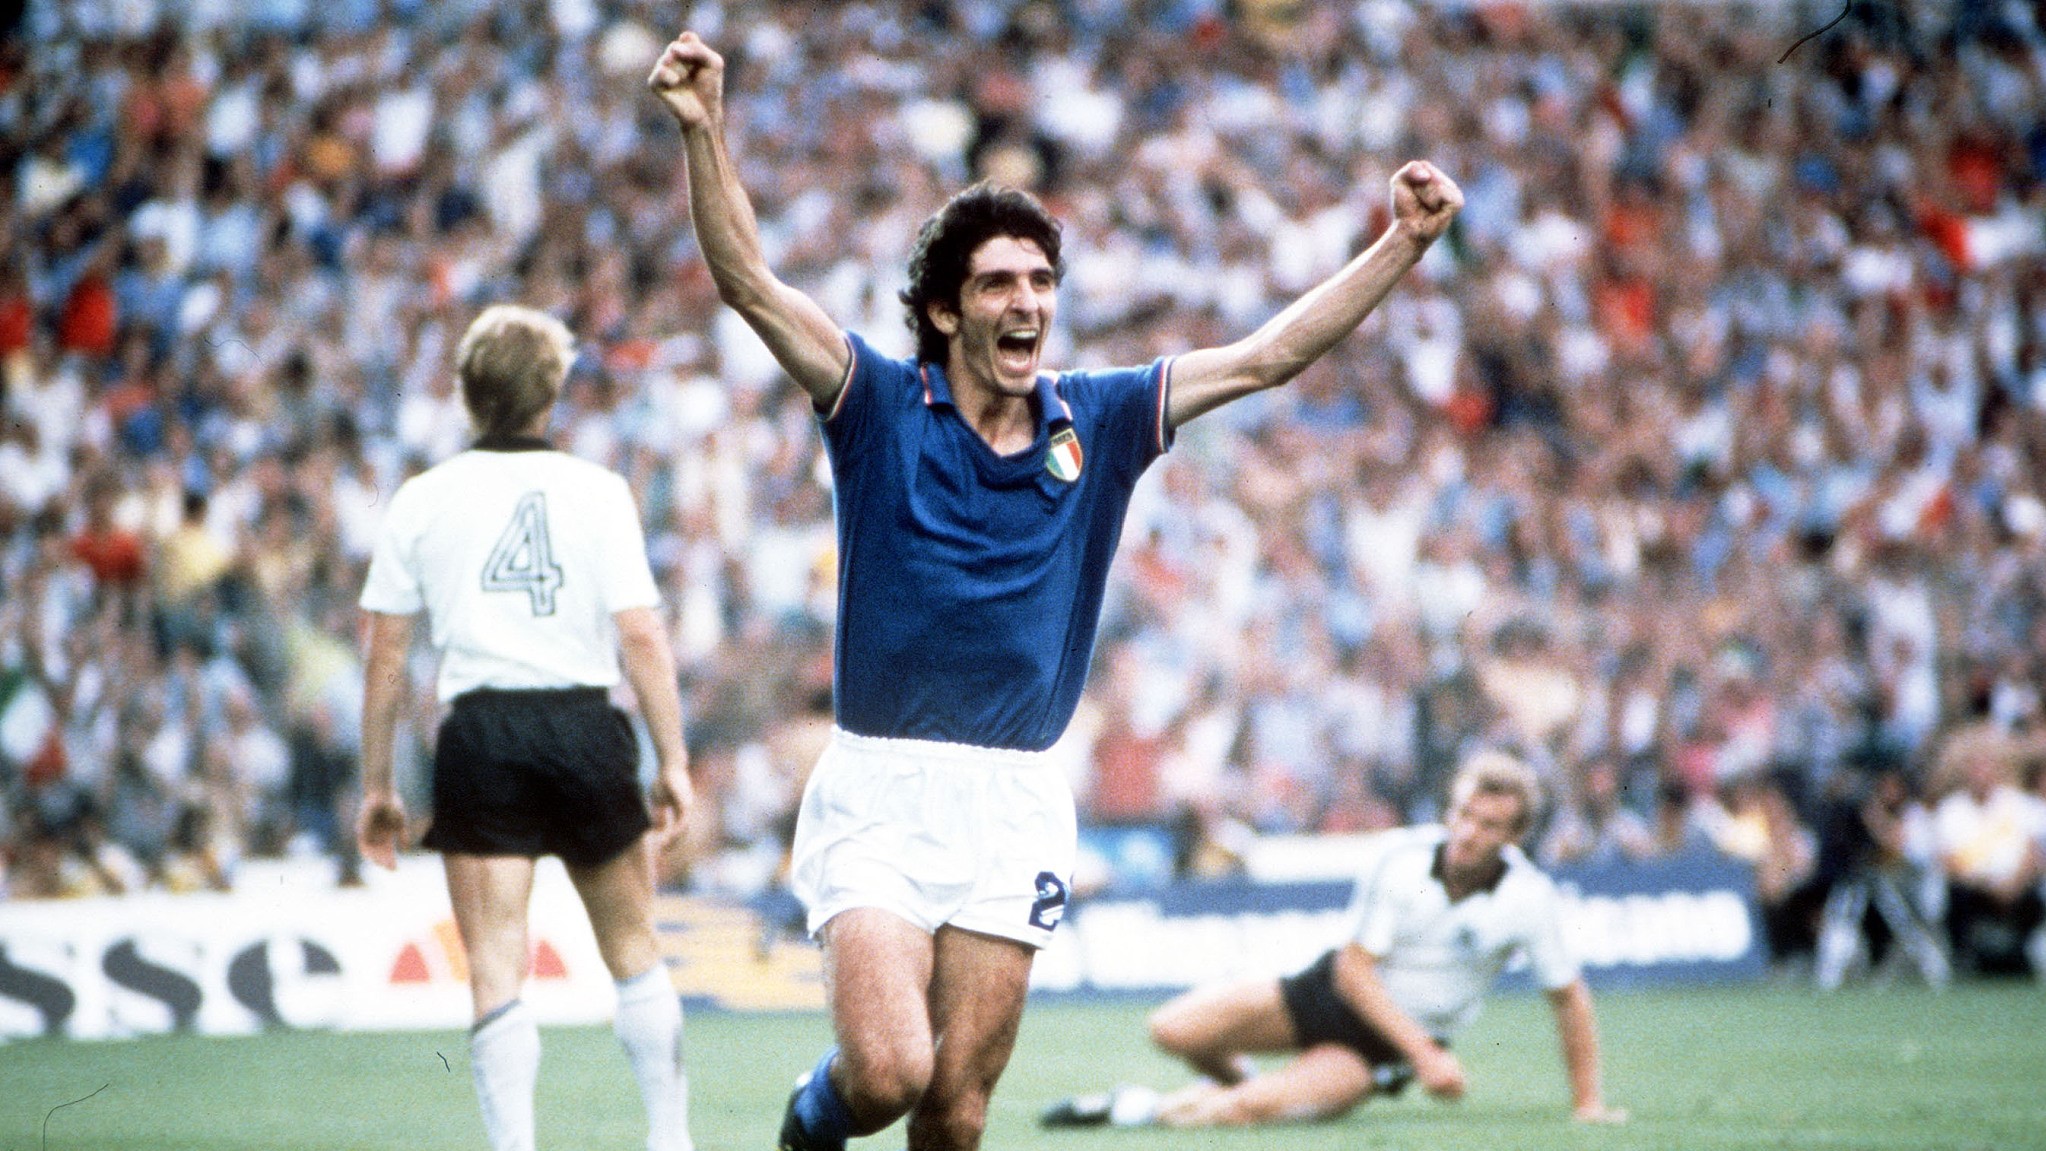 Paolo Rossi, the golden boy Italy cheered for in 1982, dies at 64 - CGTN